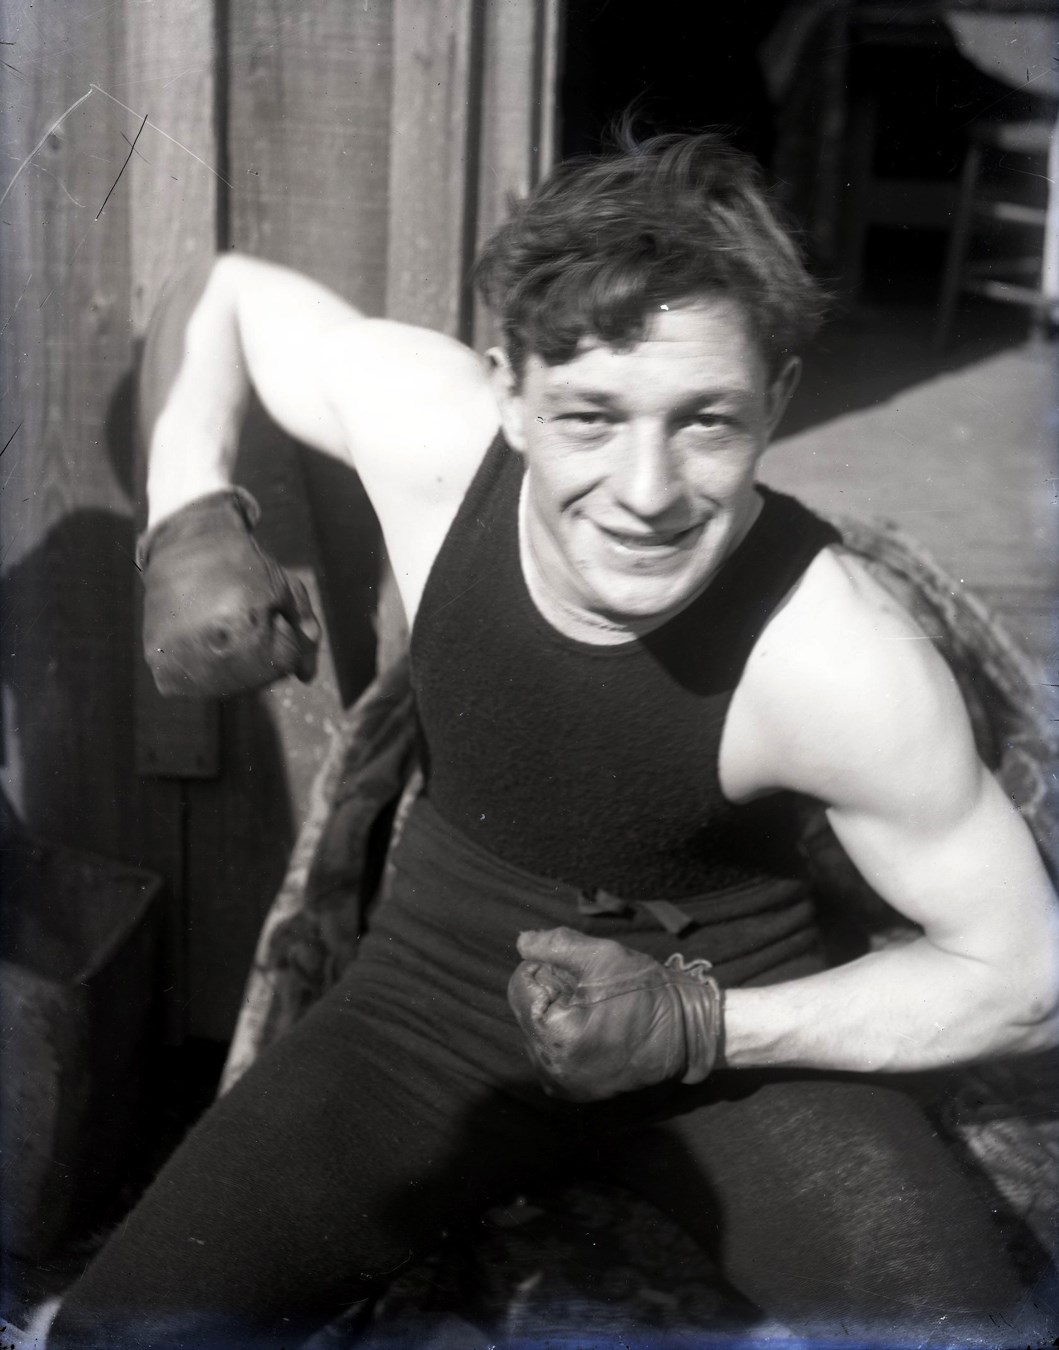 Dana Collection Of Important Boxing Negatives - Early 1900s Stanley Ketchel "Candid Portrait" Type I Glass Plate Negative by the Dana Studio